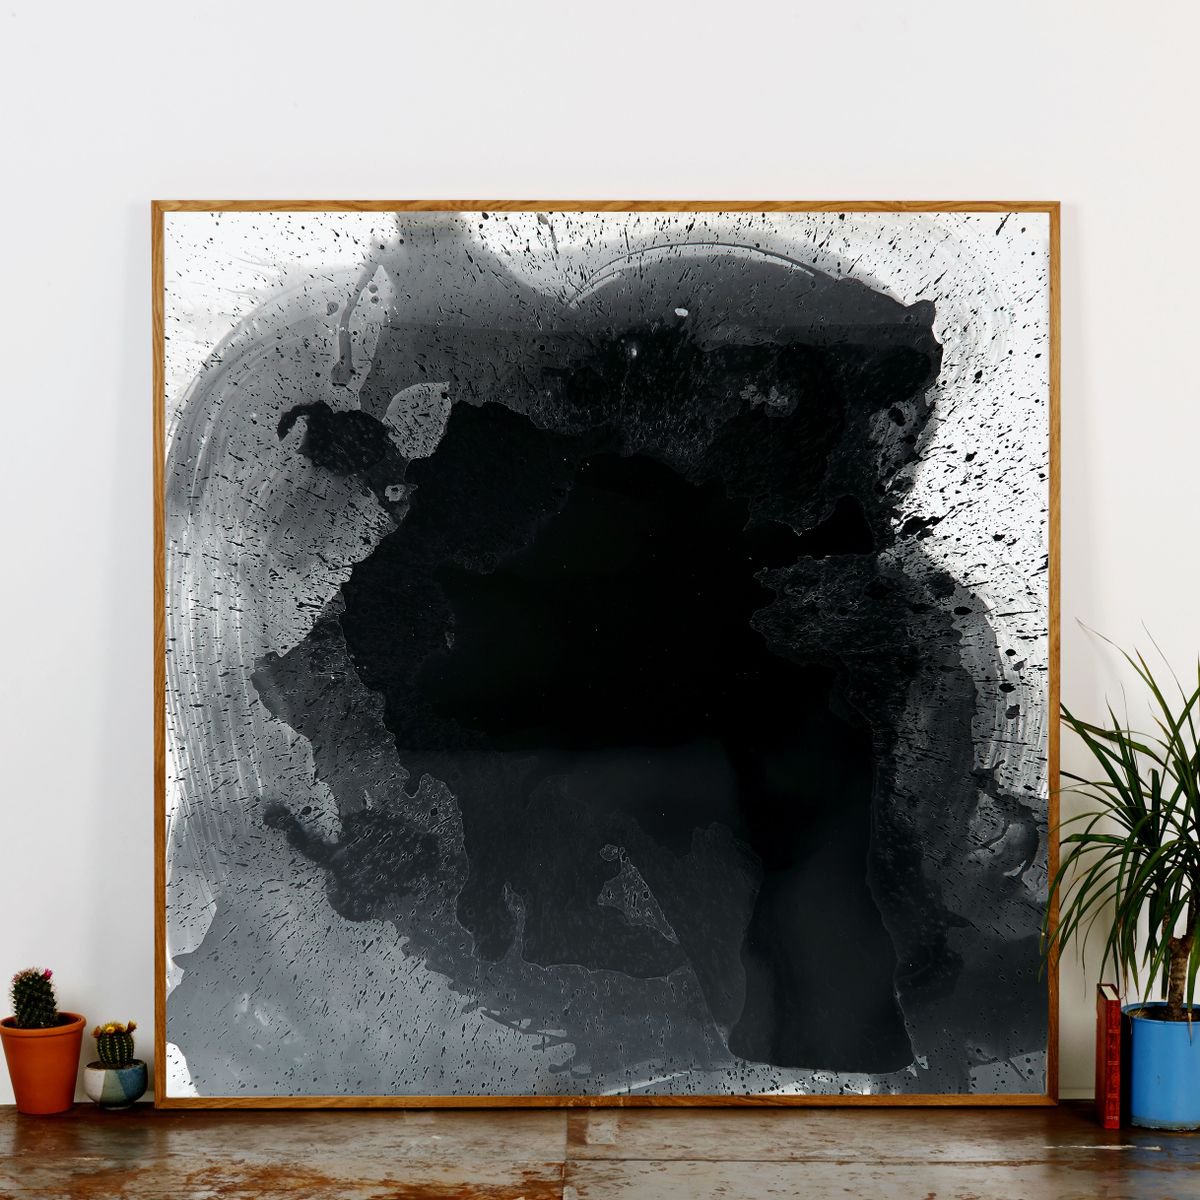 Abstract Black And White, Original Art, Painting, Wall Art, Darkroom Photography by Daniel Gregory